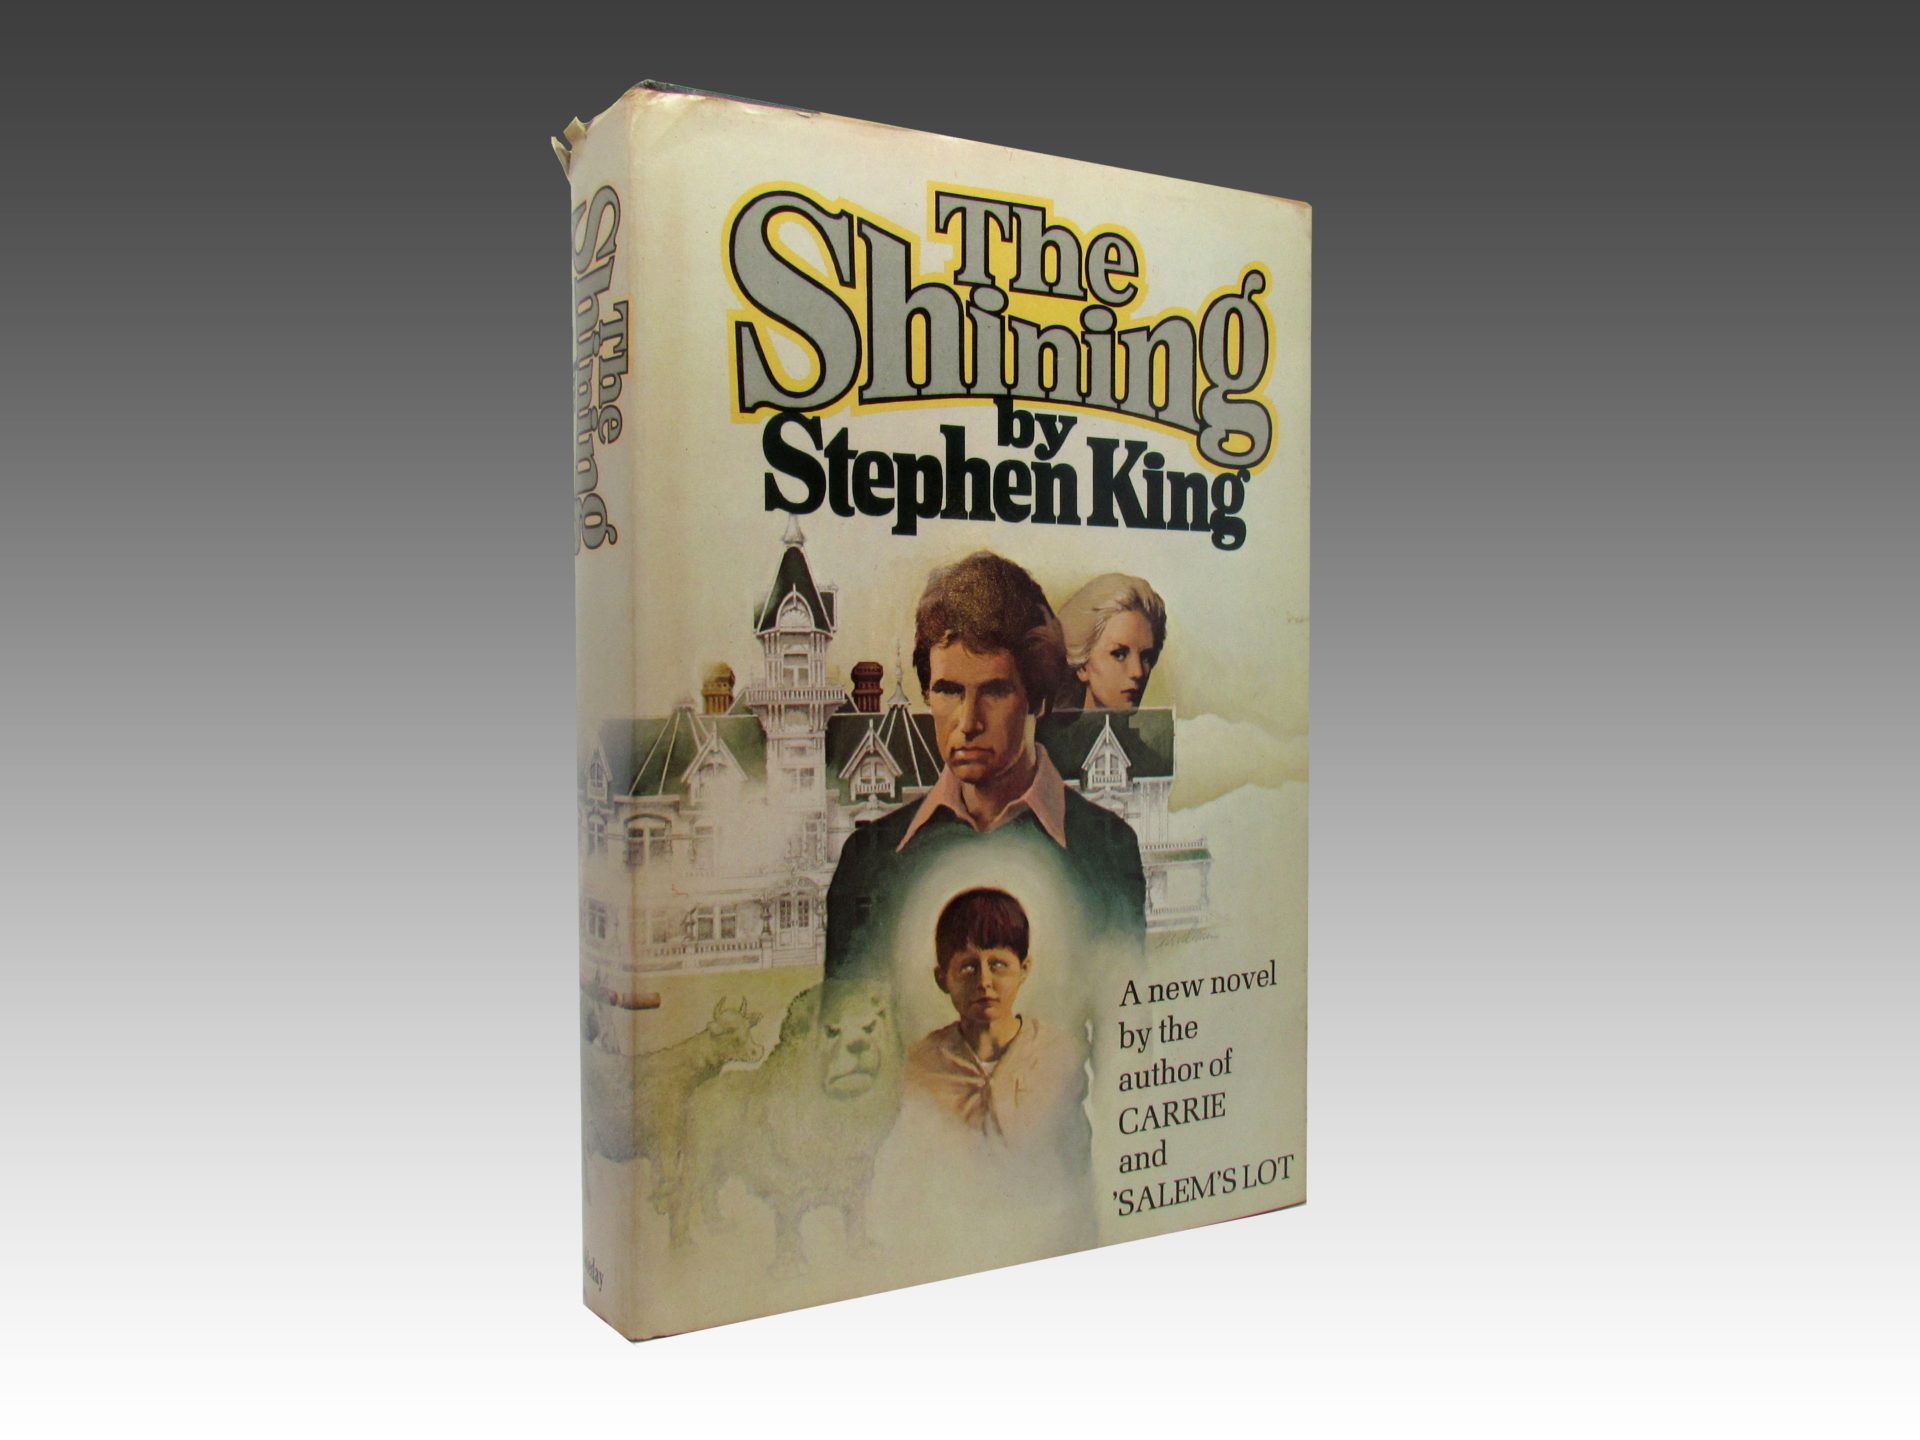 16-astounding-facts-about-the-shining-stephen-king